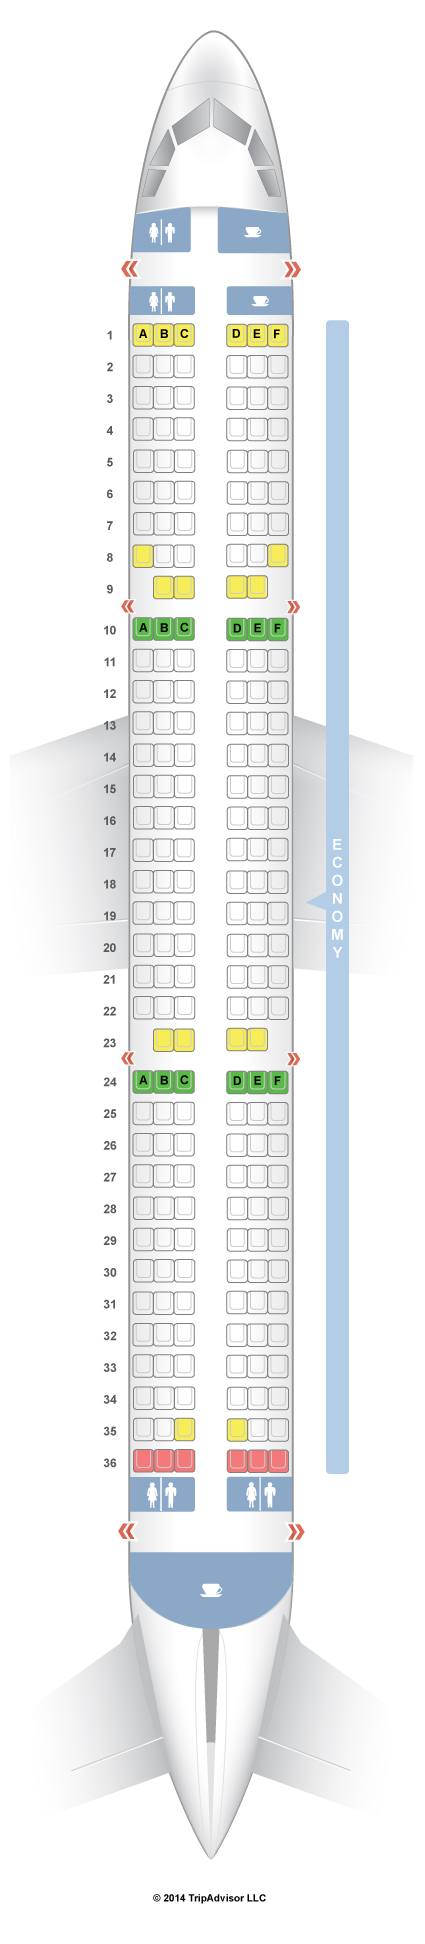 Airbus A321 Seating Map Porn Sex Picture